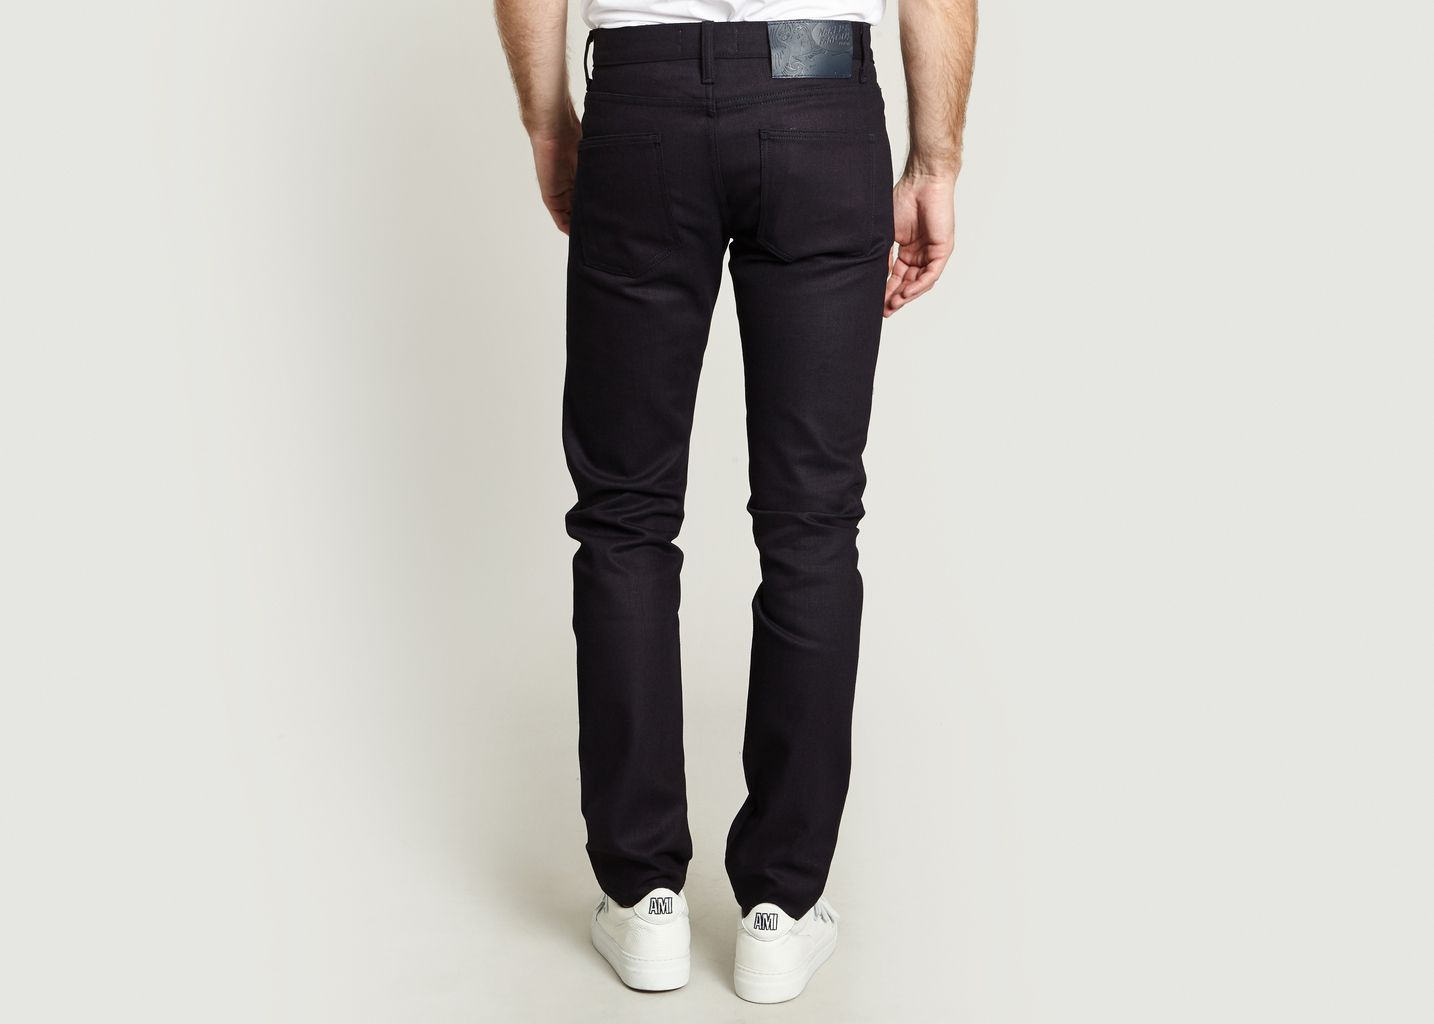 Jean Super Guy Stretch Selvedge - Naked and Famous